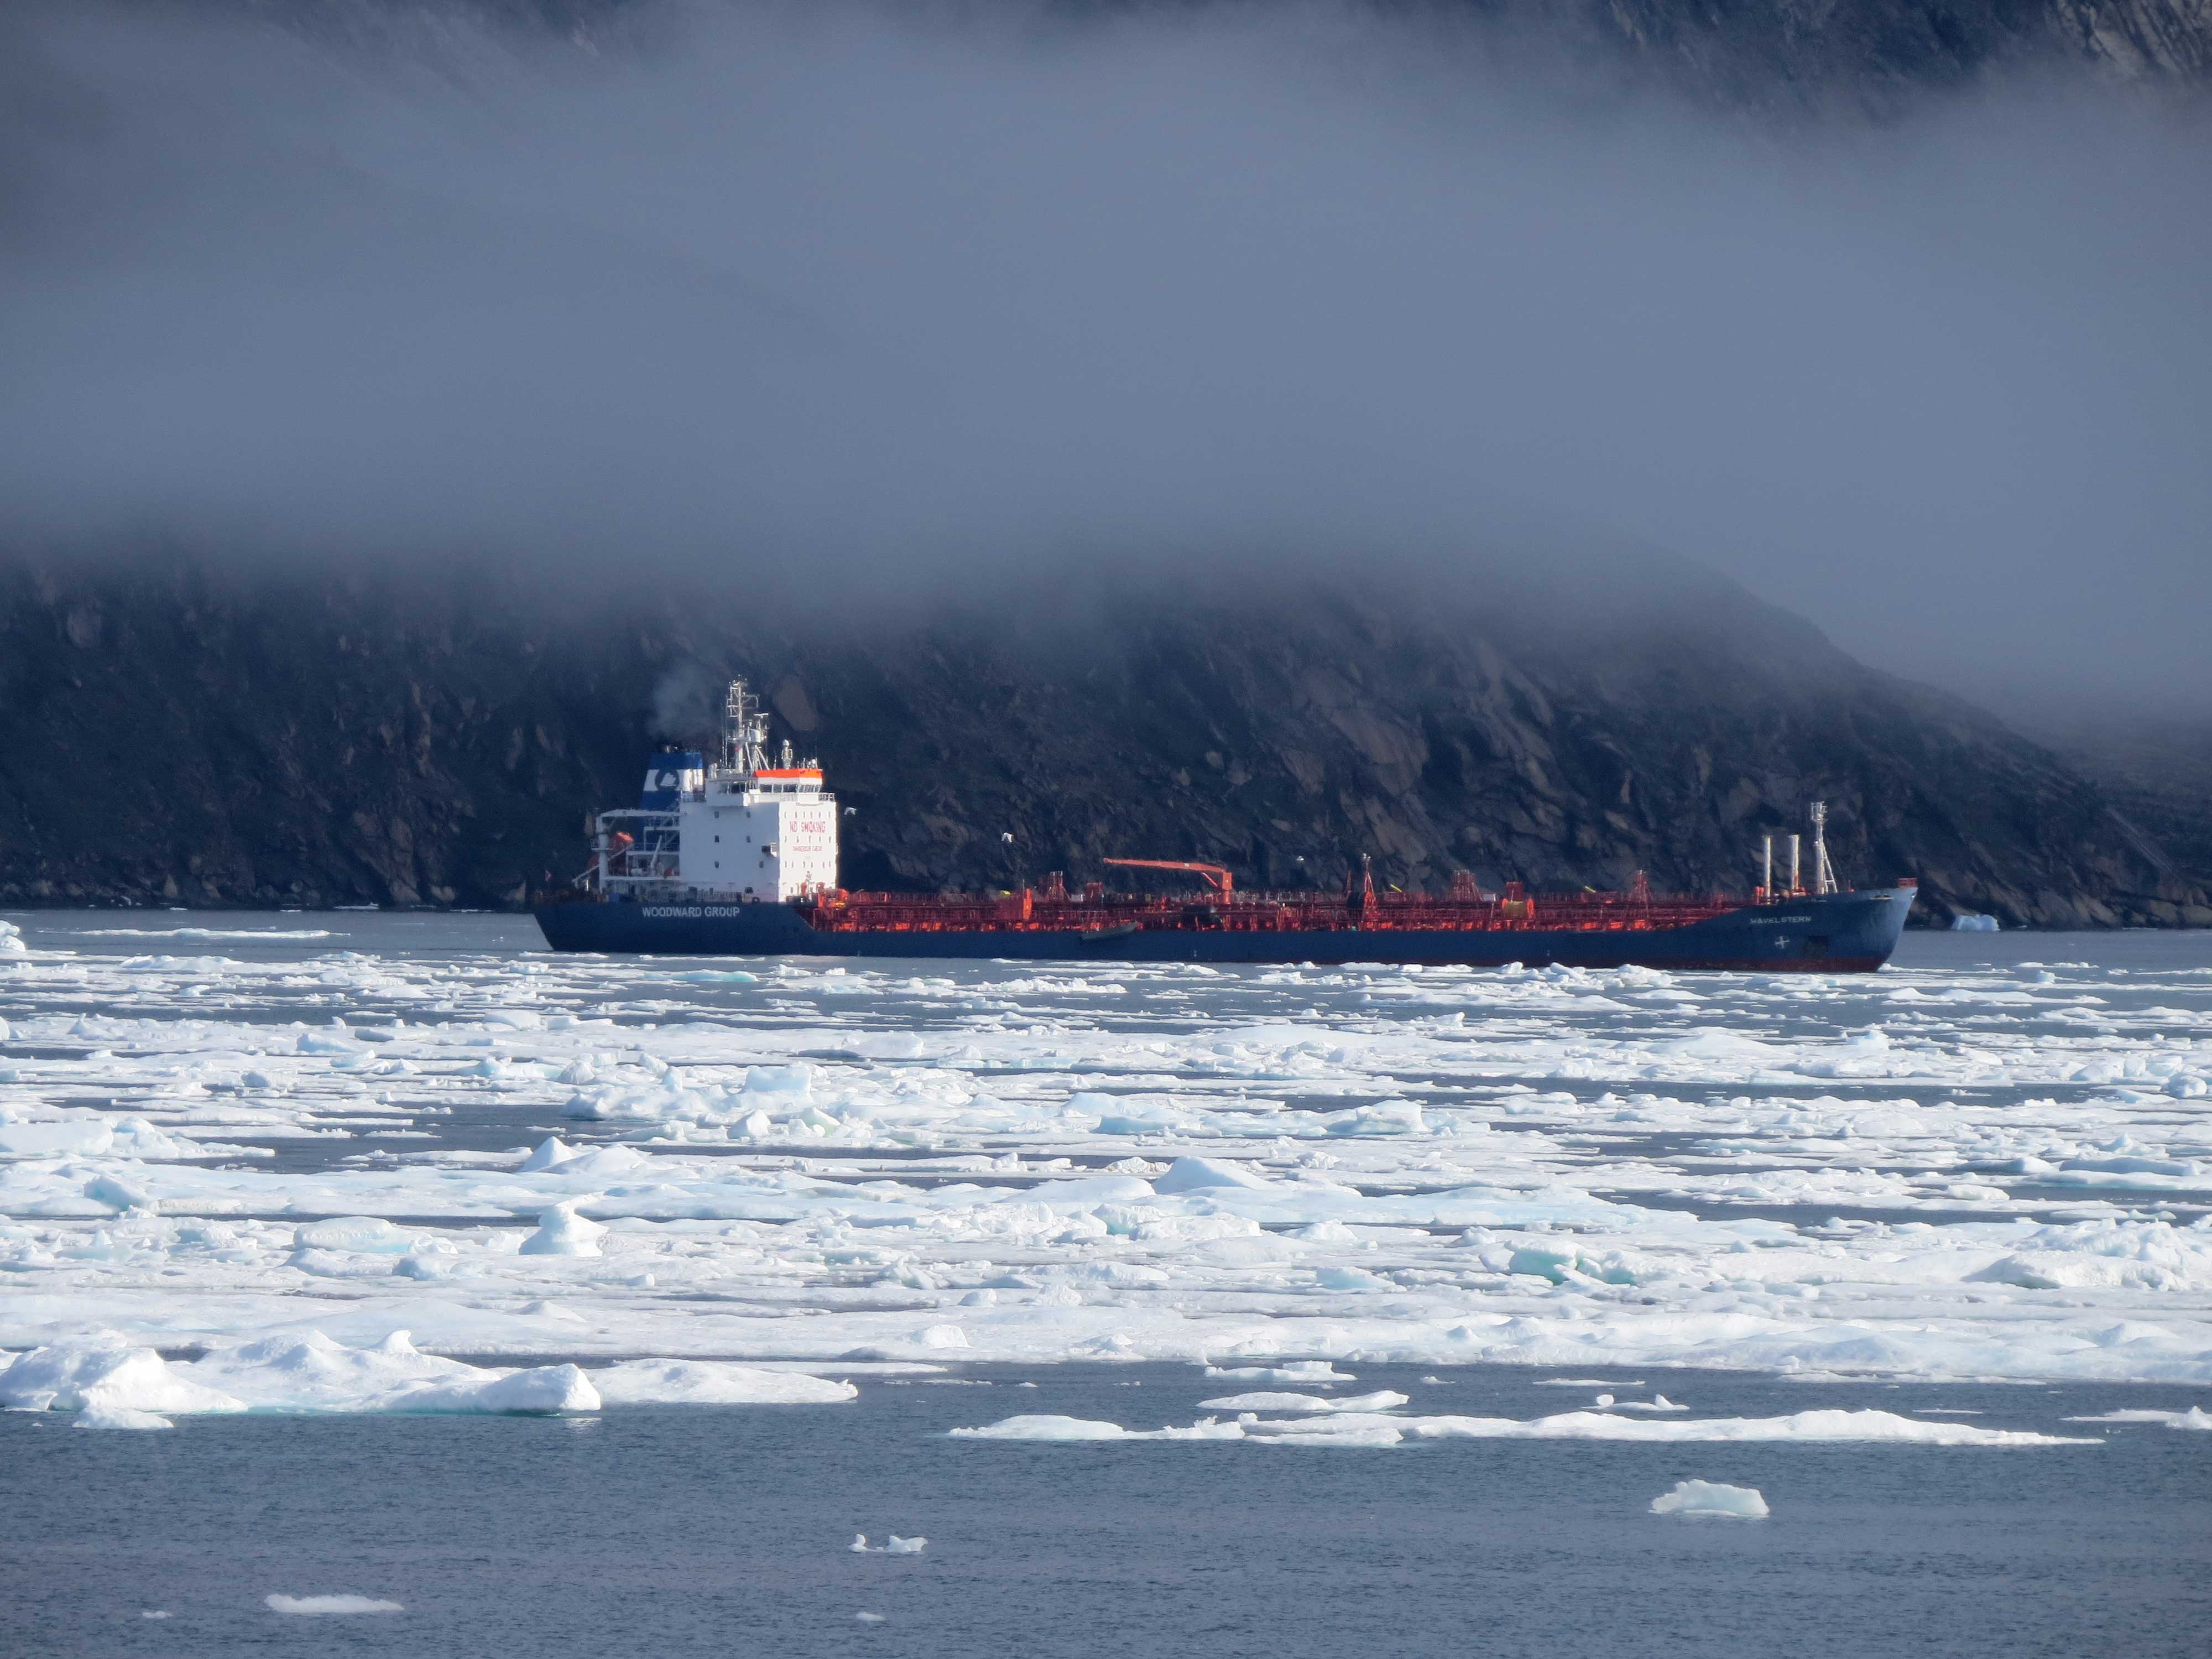 A long, dark blue tanker puffs smoke, with ice chunks across the waterway in front. A mountain disappears into fog behind it.